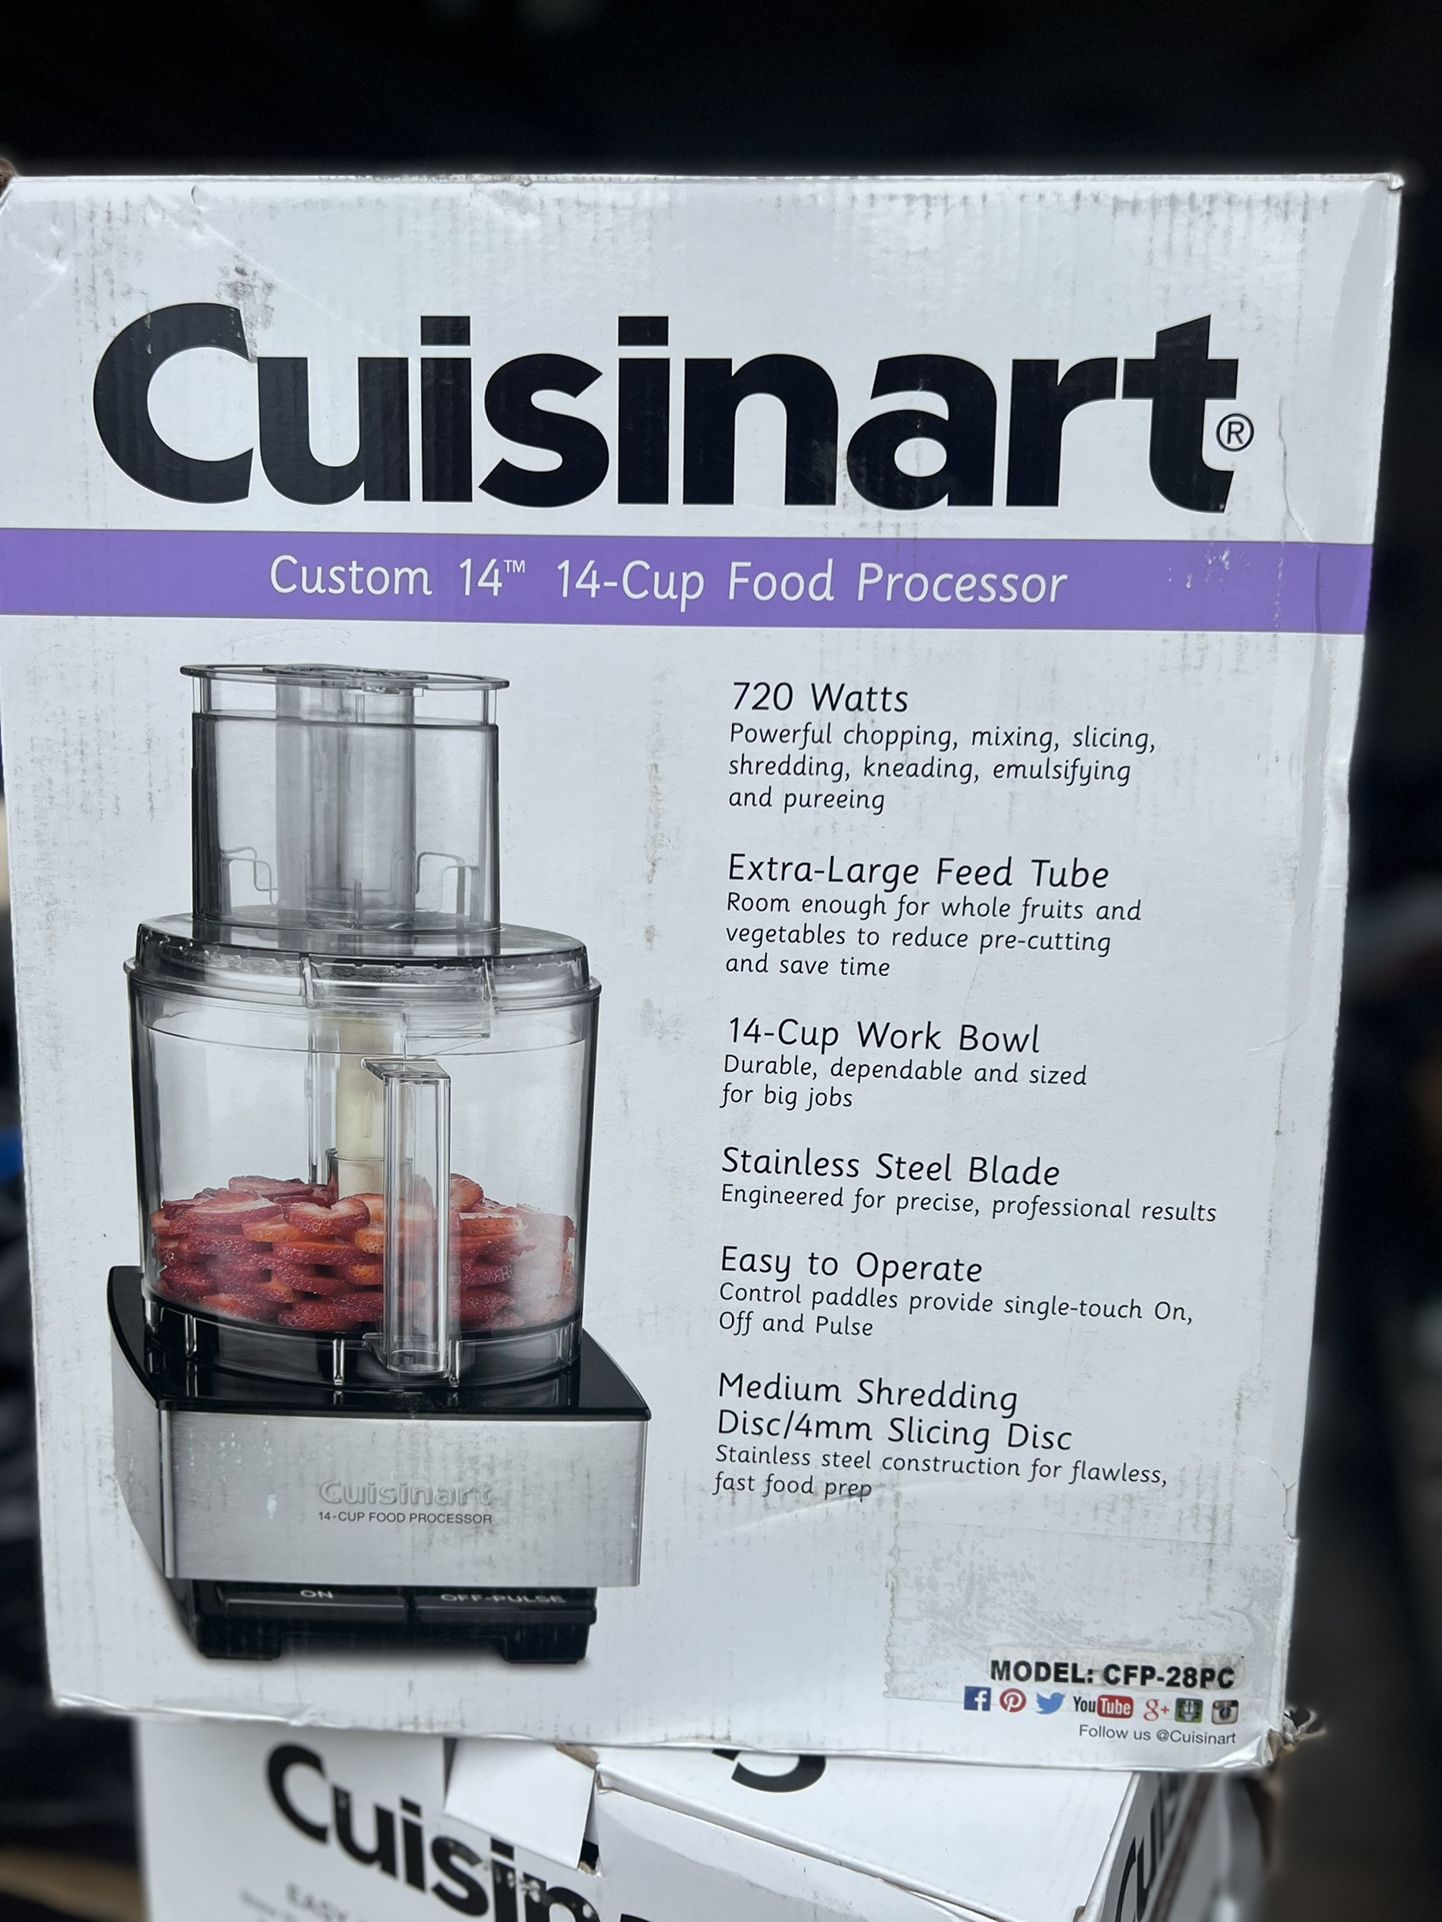 Cuisinart 14 Cup Food Processor, Includes Stainless Steel Standard Slicing Disc (4mm), Medium Shredding Disc, & Stainless Steel Chopping/Mixing Blade,